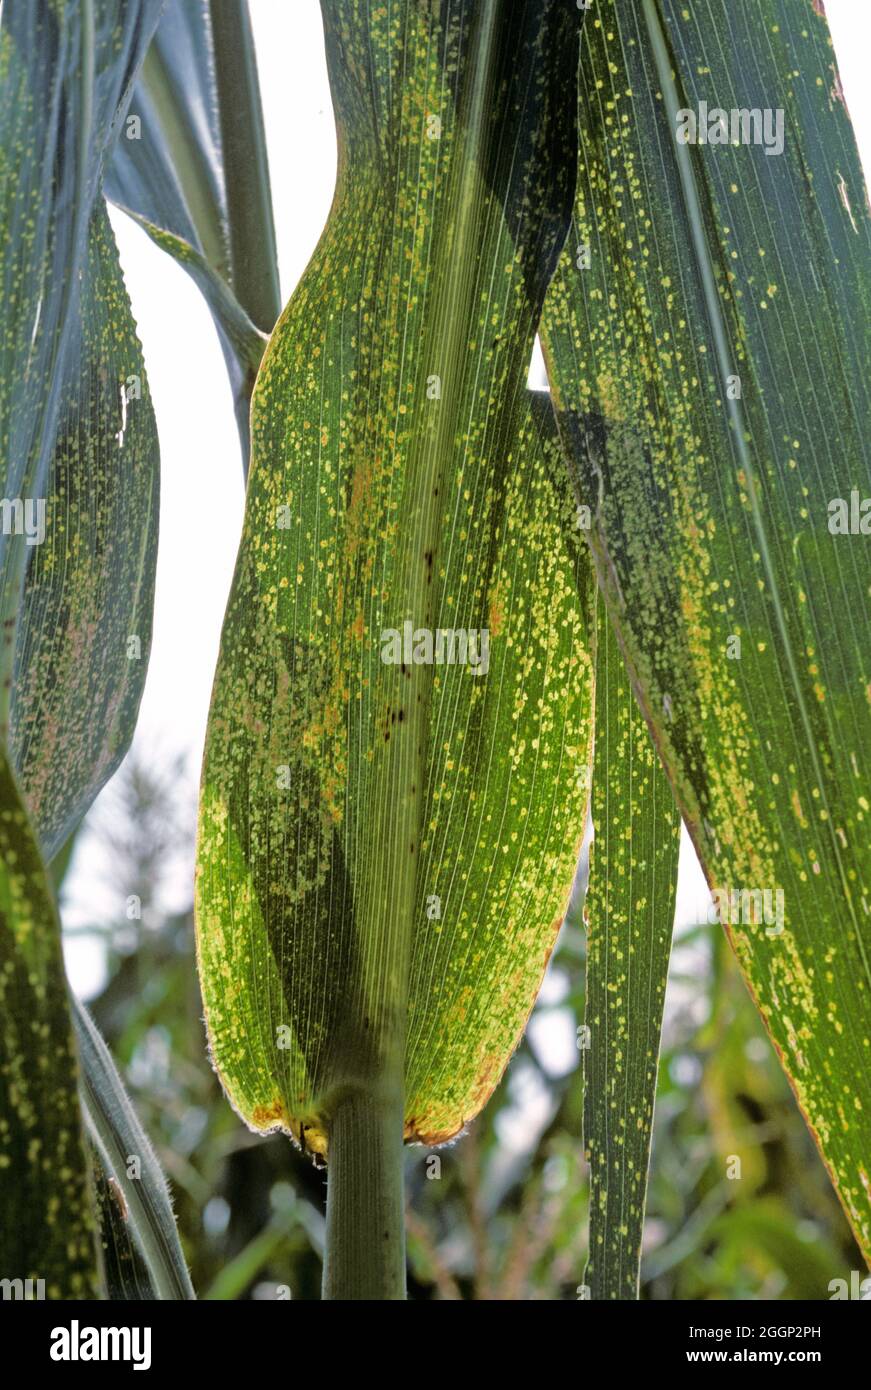 Maize eyespot (Kabatiella zeae) fungal disease infection and lesions on maize or corn leaves on a maturing plant, Illinois, USA Stock Photo